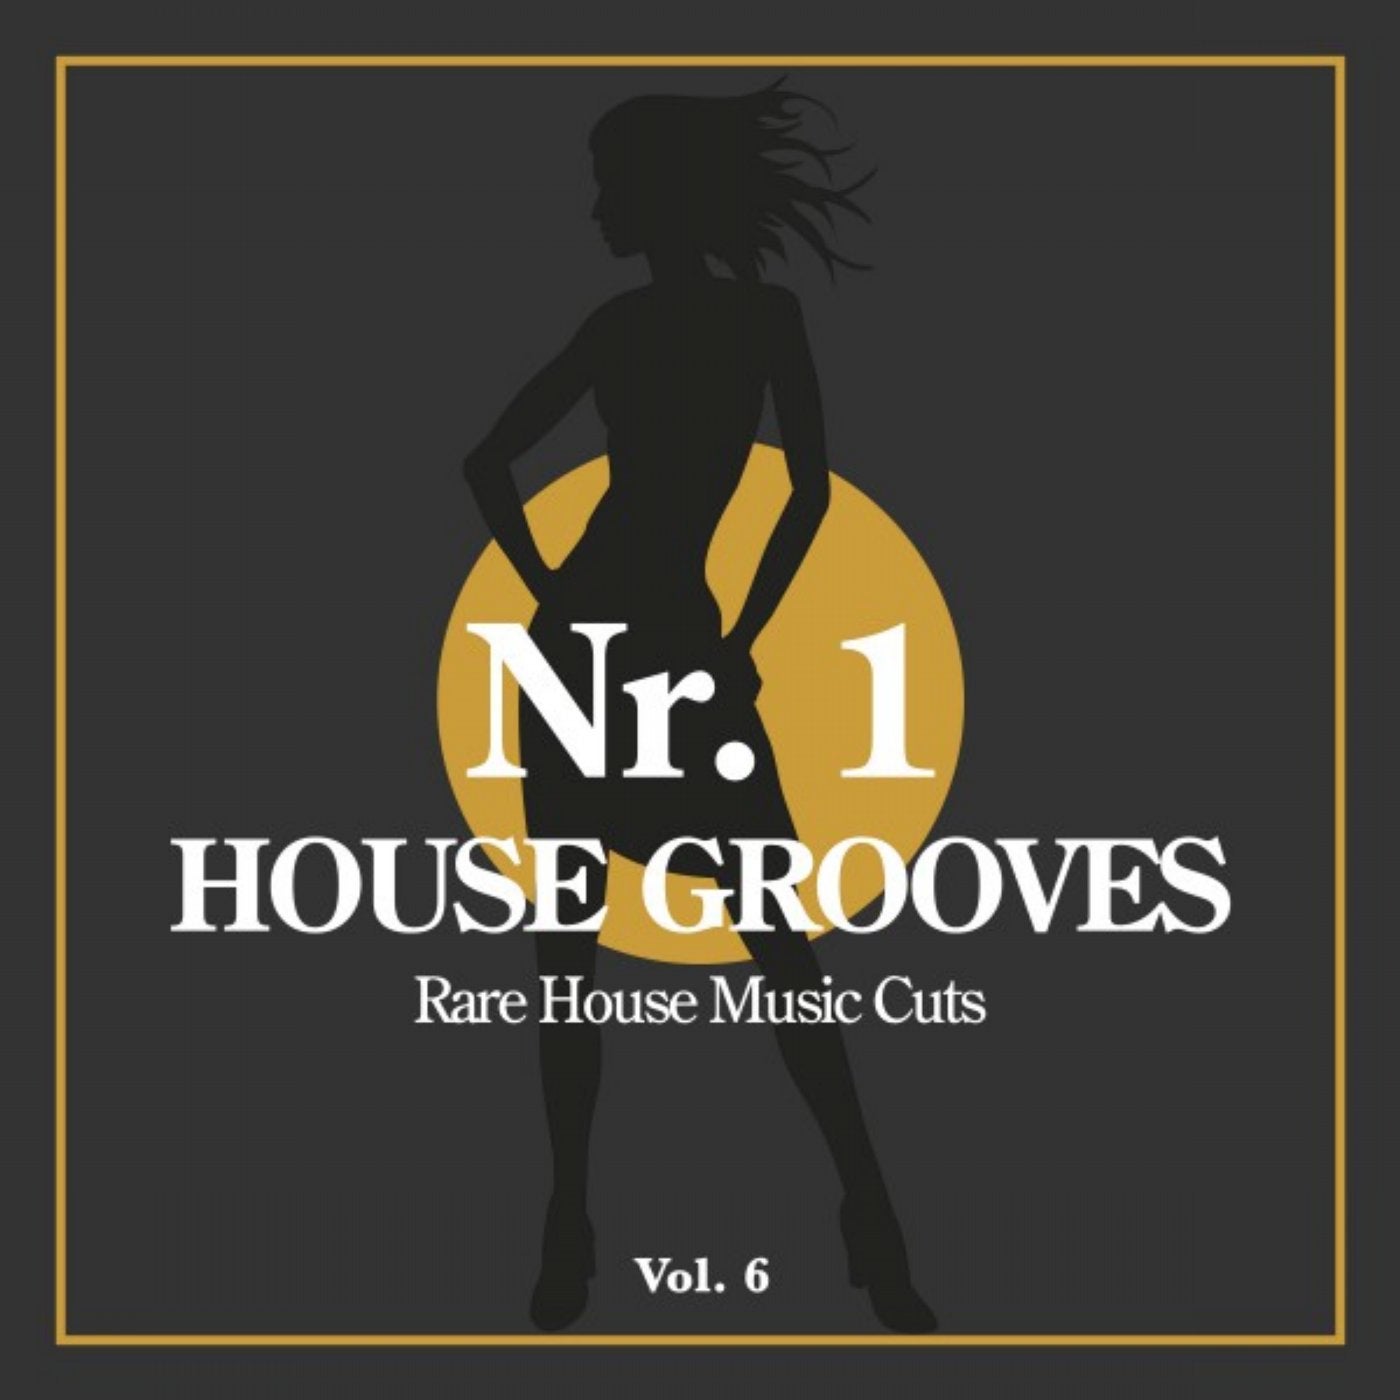 Nr. 1 House Grooves, Vol. 6 (Rare House Music Cuts)